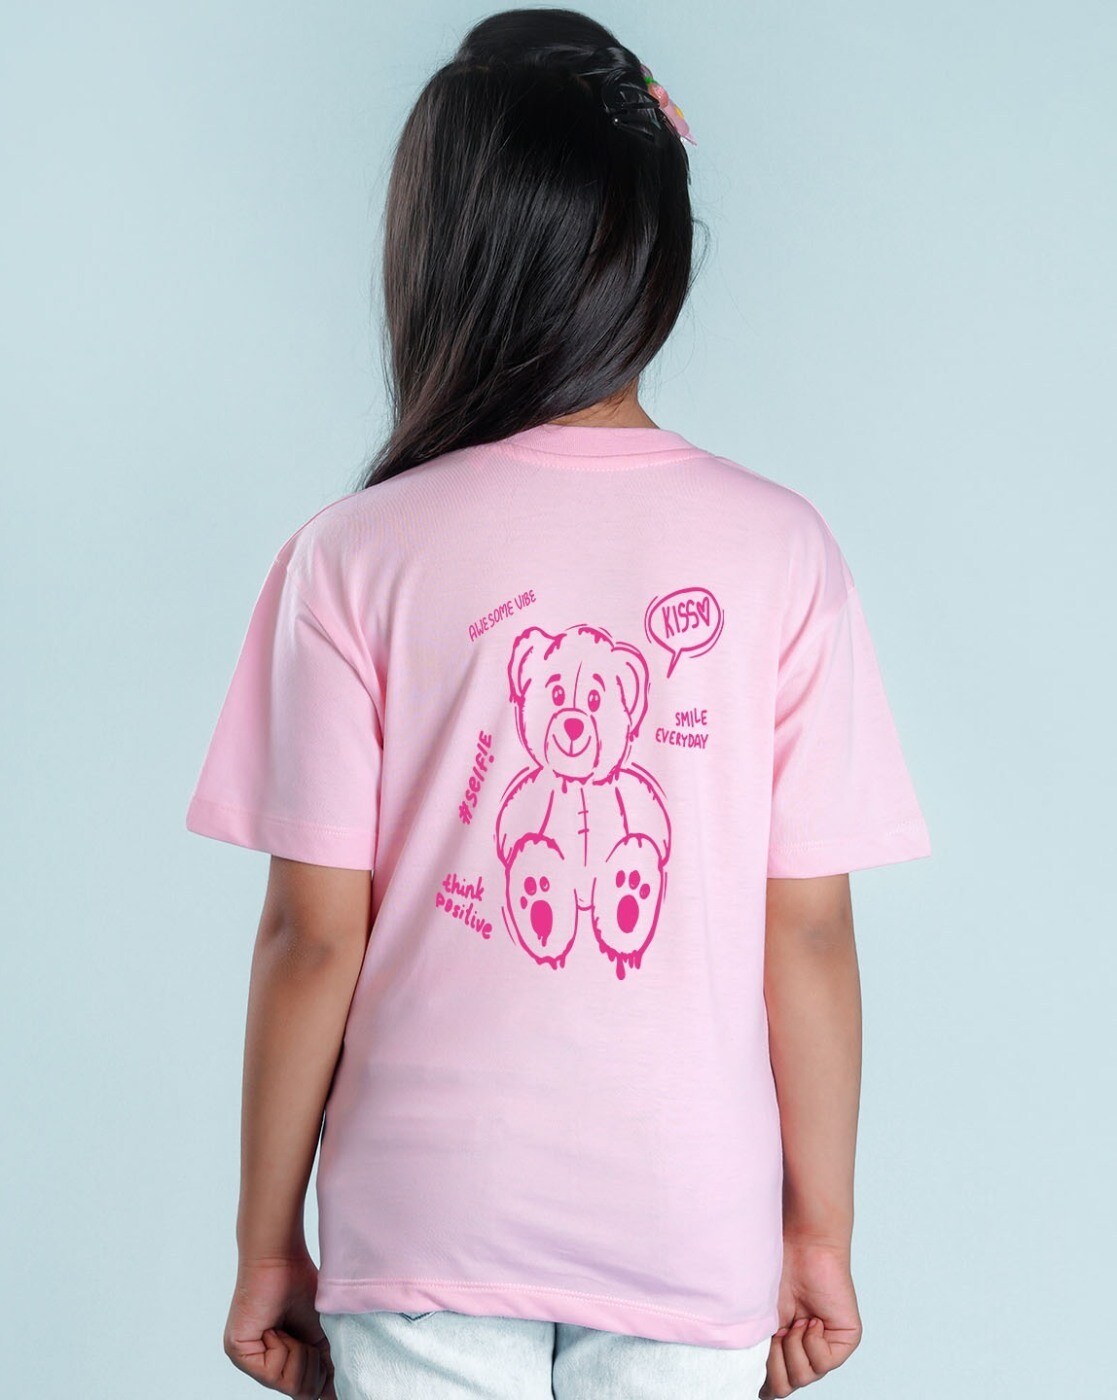 Buy Pink Tshirts for Girls by Nusyl Online